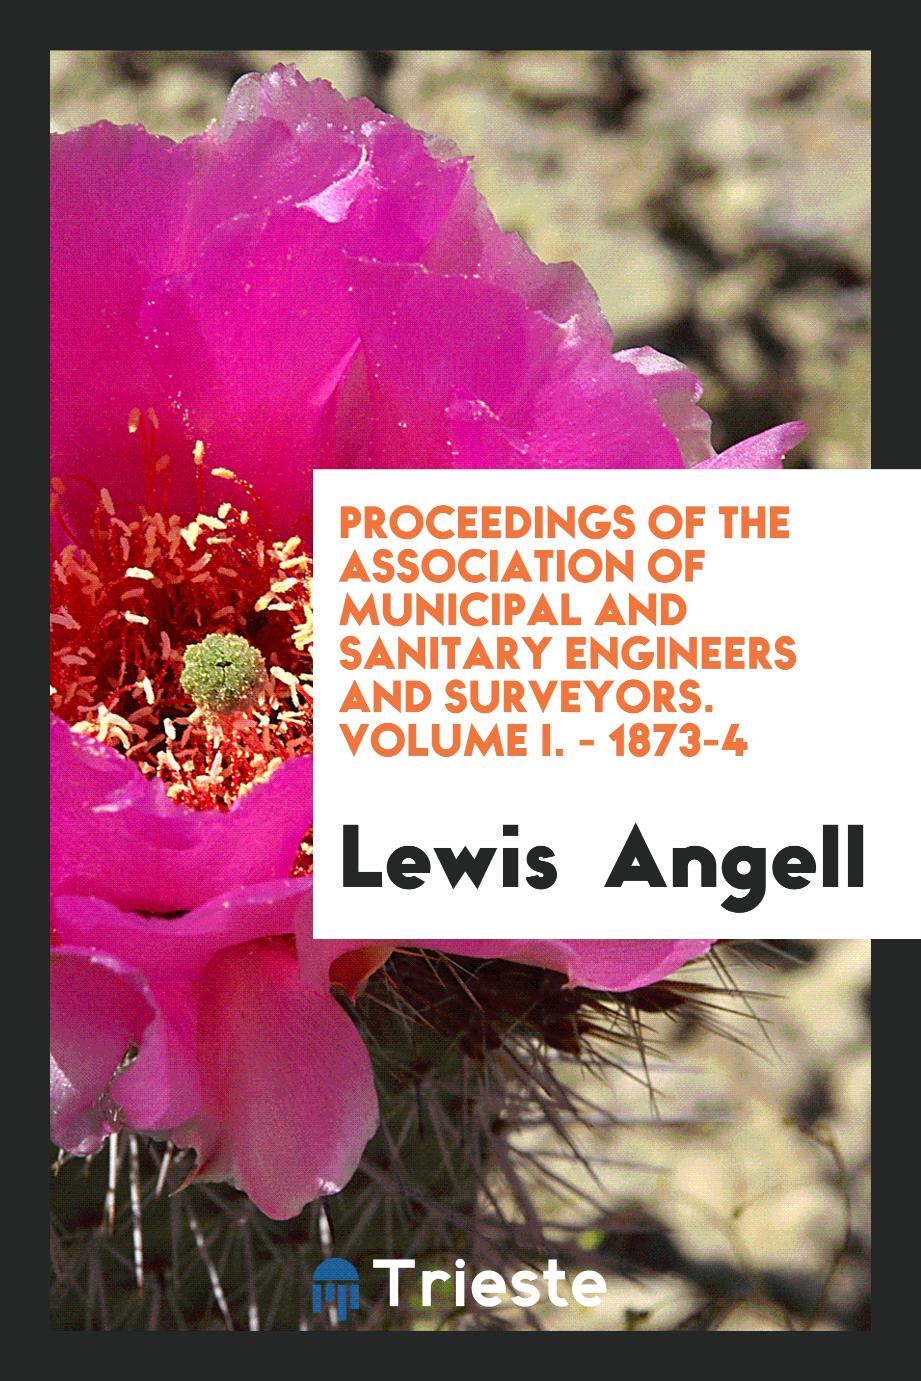 Proceedings of the Association of Municipal and Sanitary Engineers and Surveyors. Volume I. - 1873-4